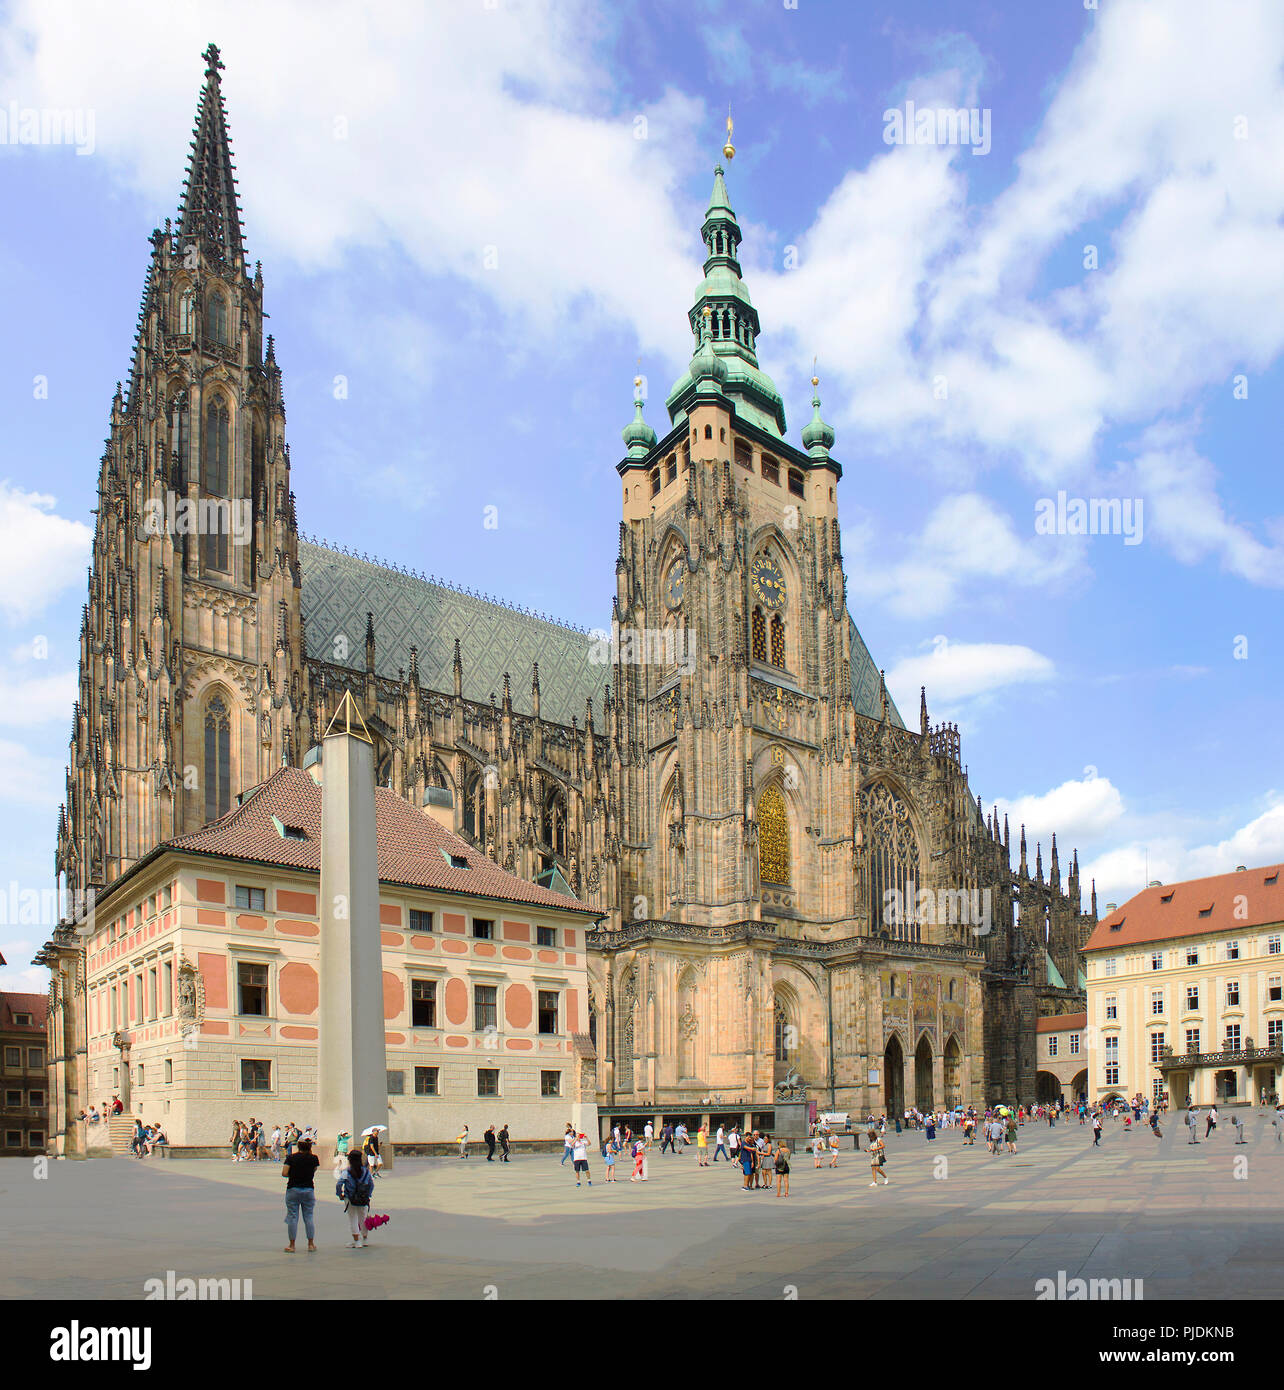 St Vitus Cathedral gothic architecture of Prague Stock Photo